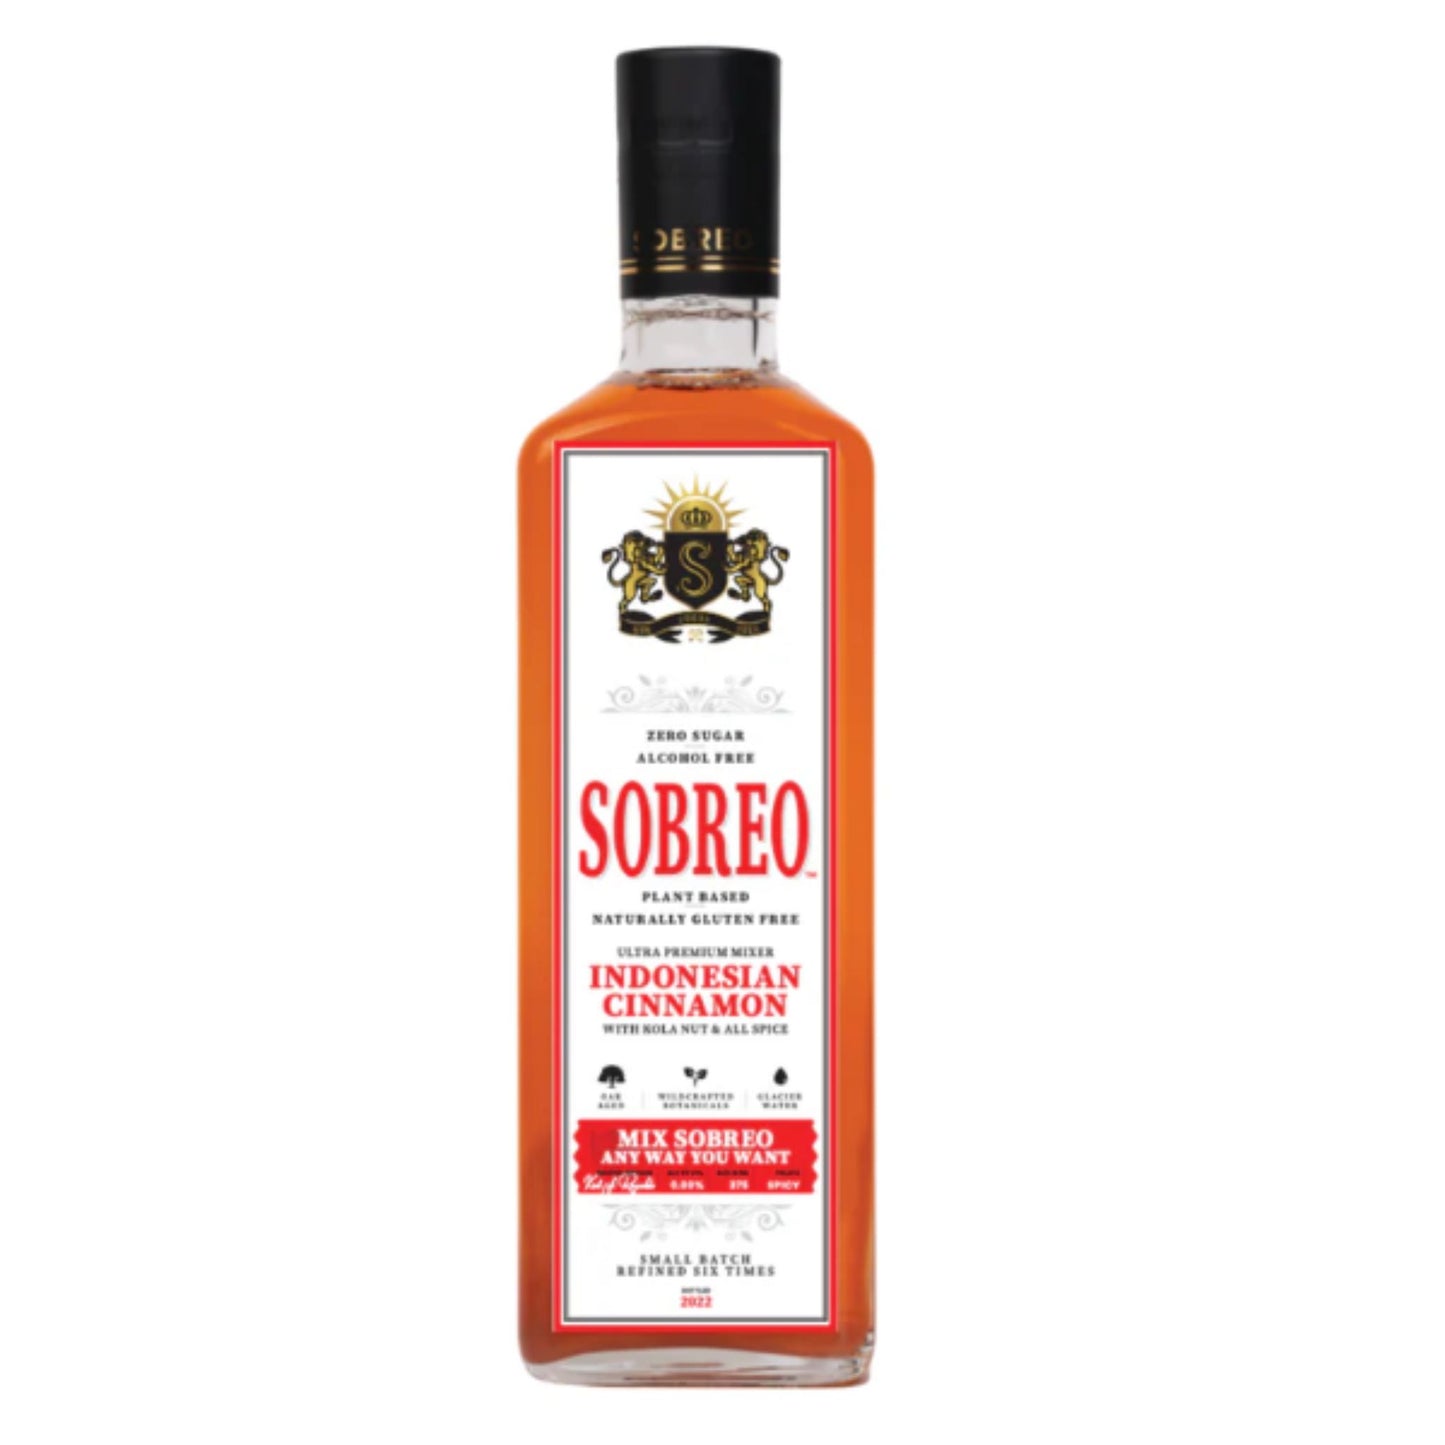 Sobreo Indonesian Cinnamon non-alcoholic cocktail mixer is available for sale at Knyota Drinks.